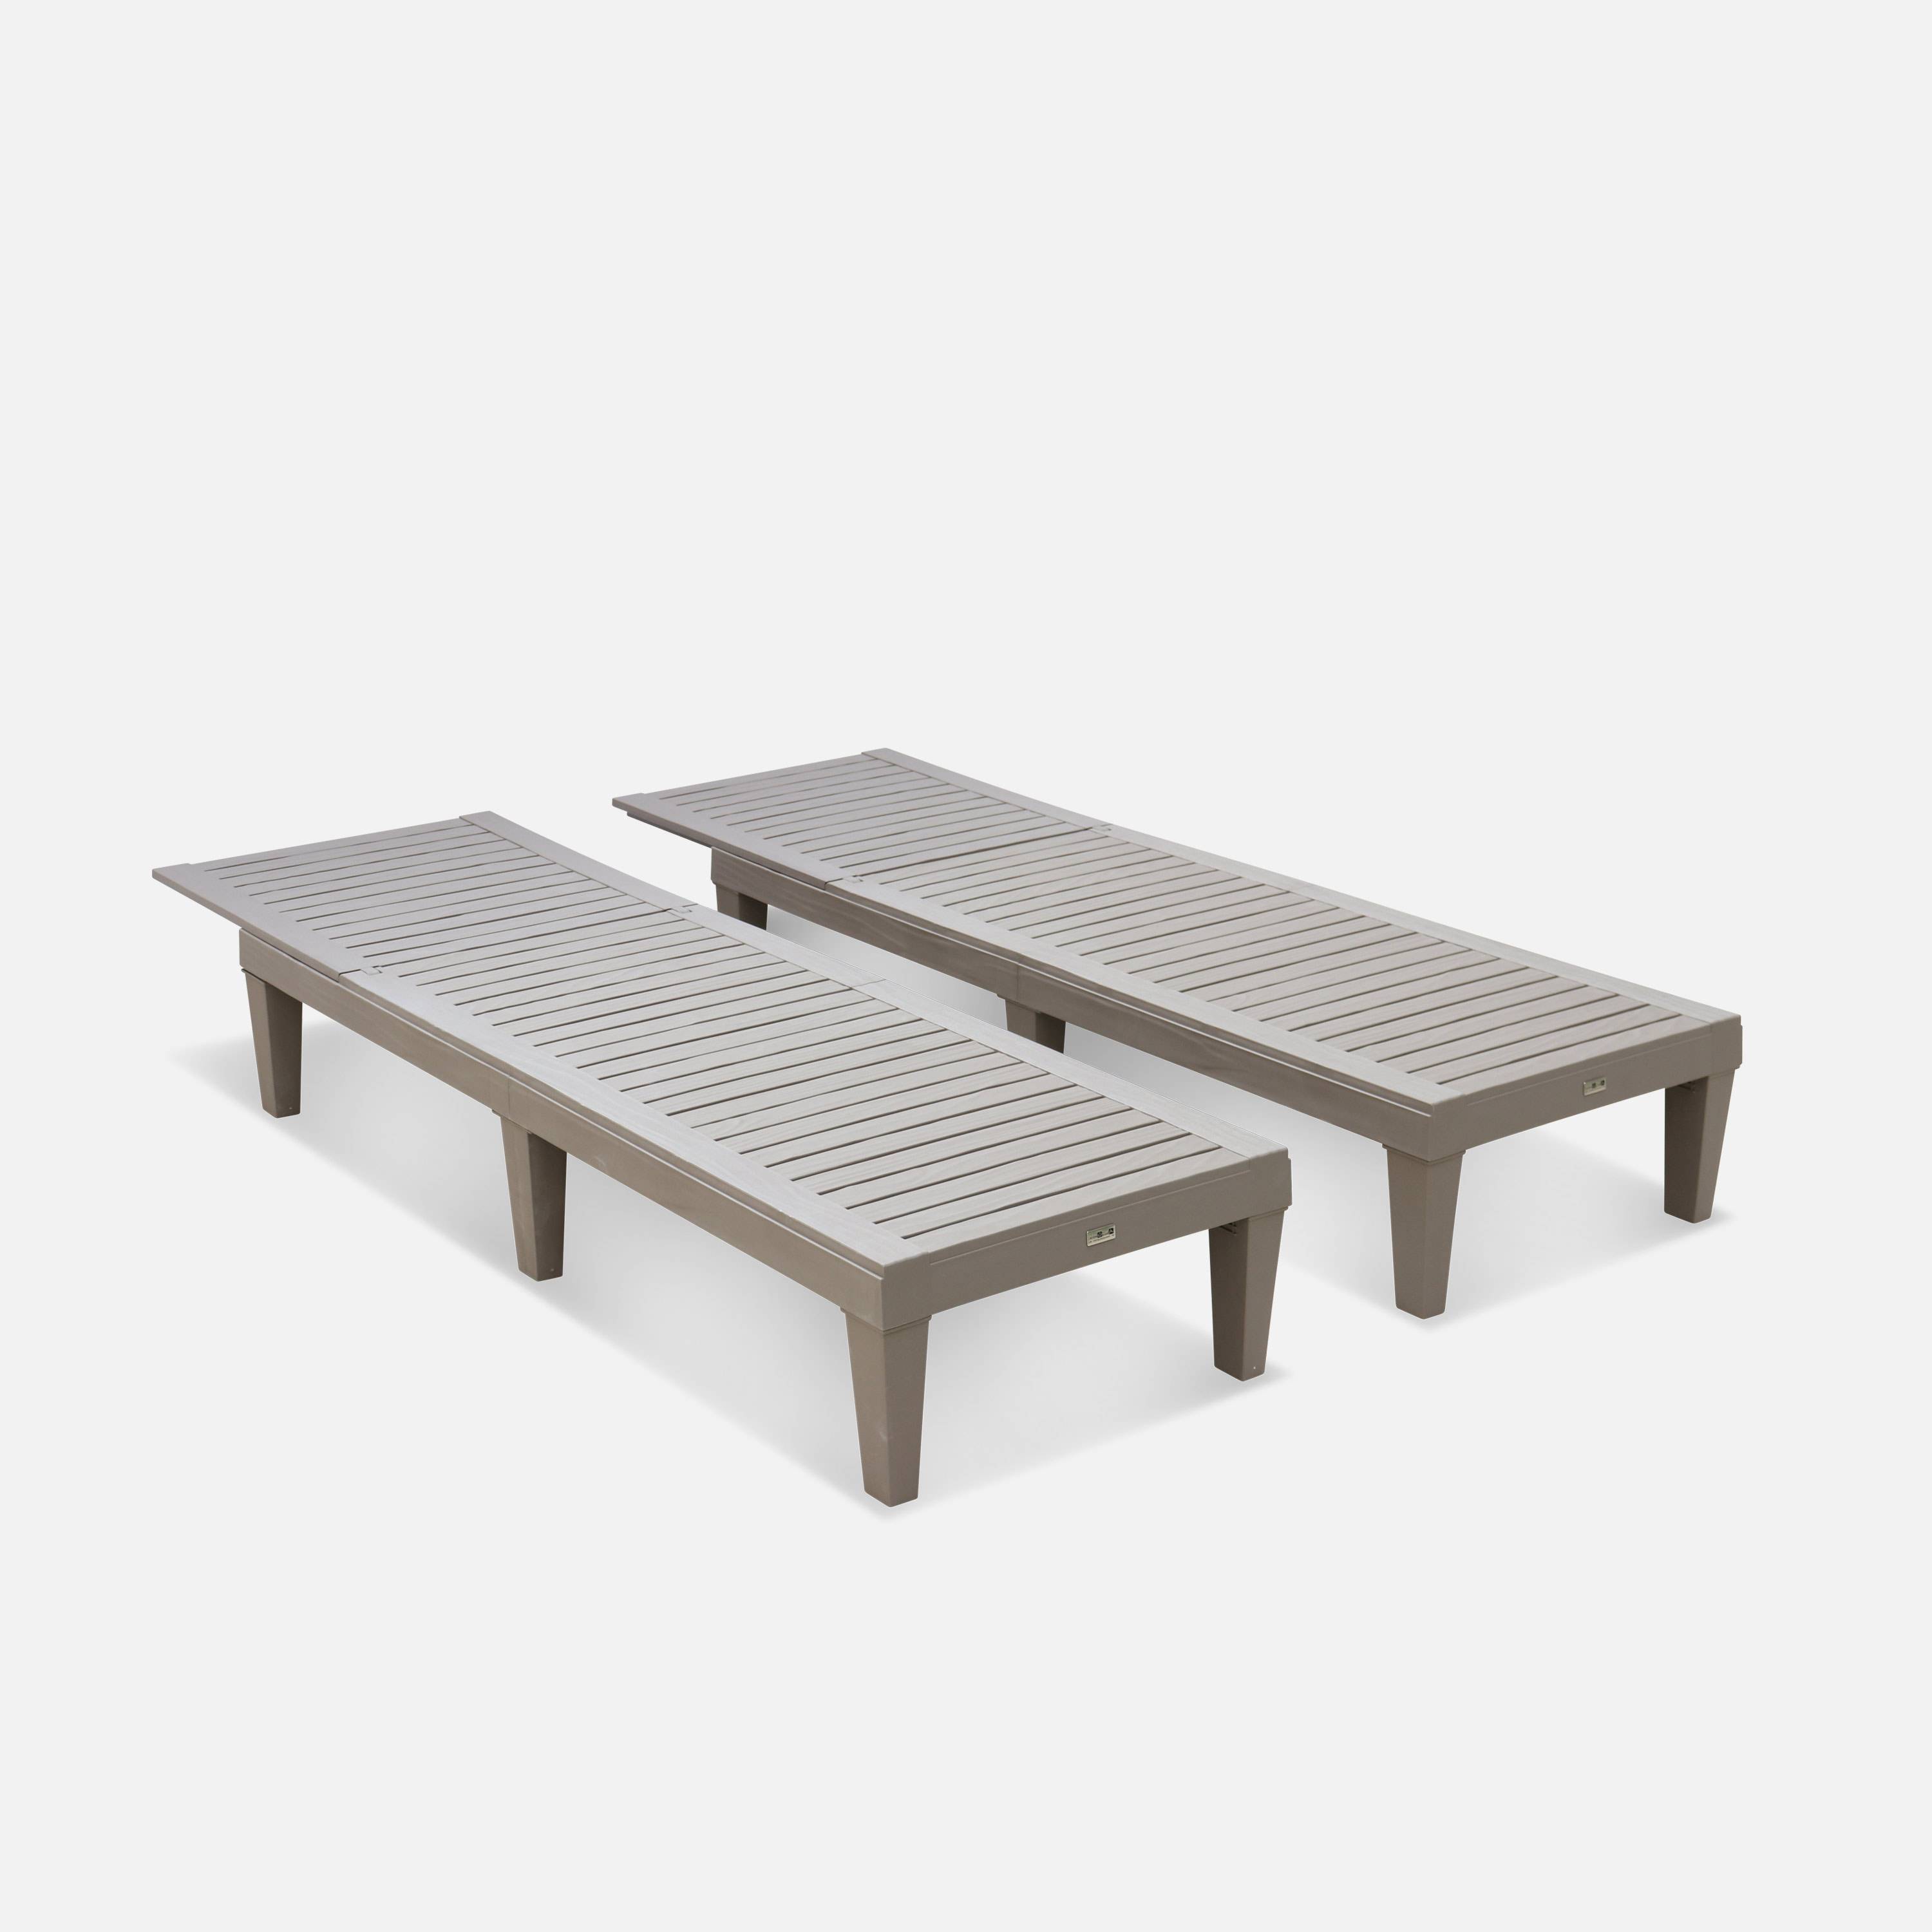 Pair of plastic loungers, multi position sun beds with textured wood effect - Pia - Grey,sweeek,Photo3